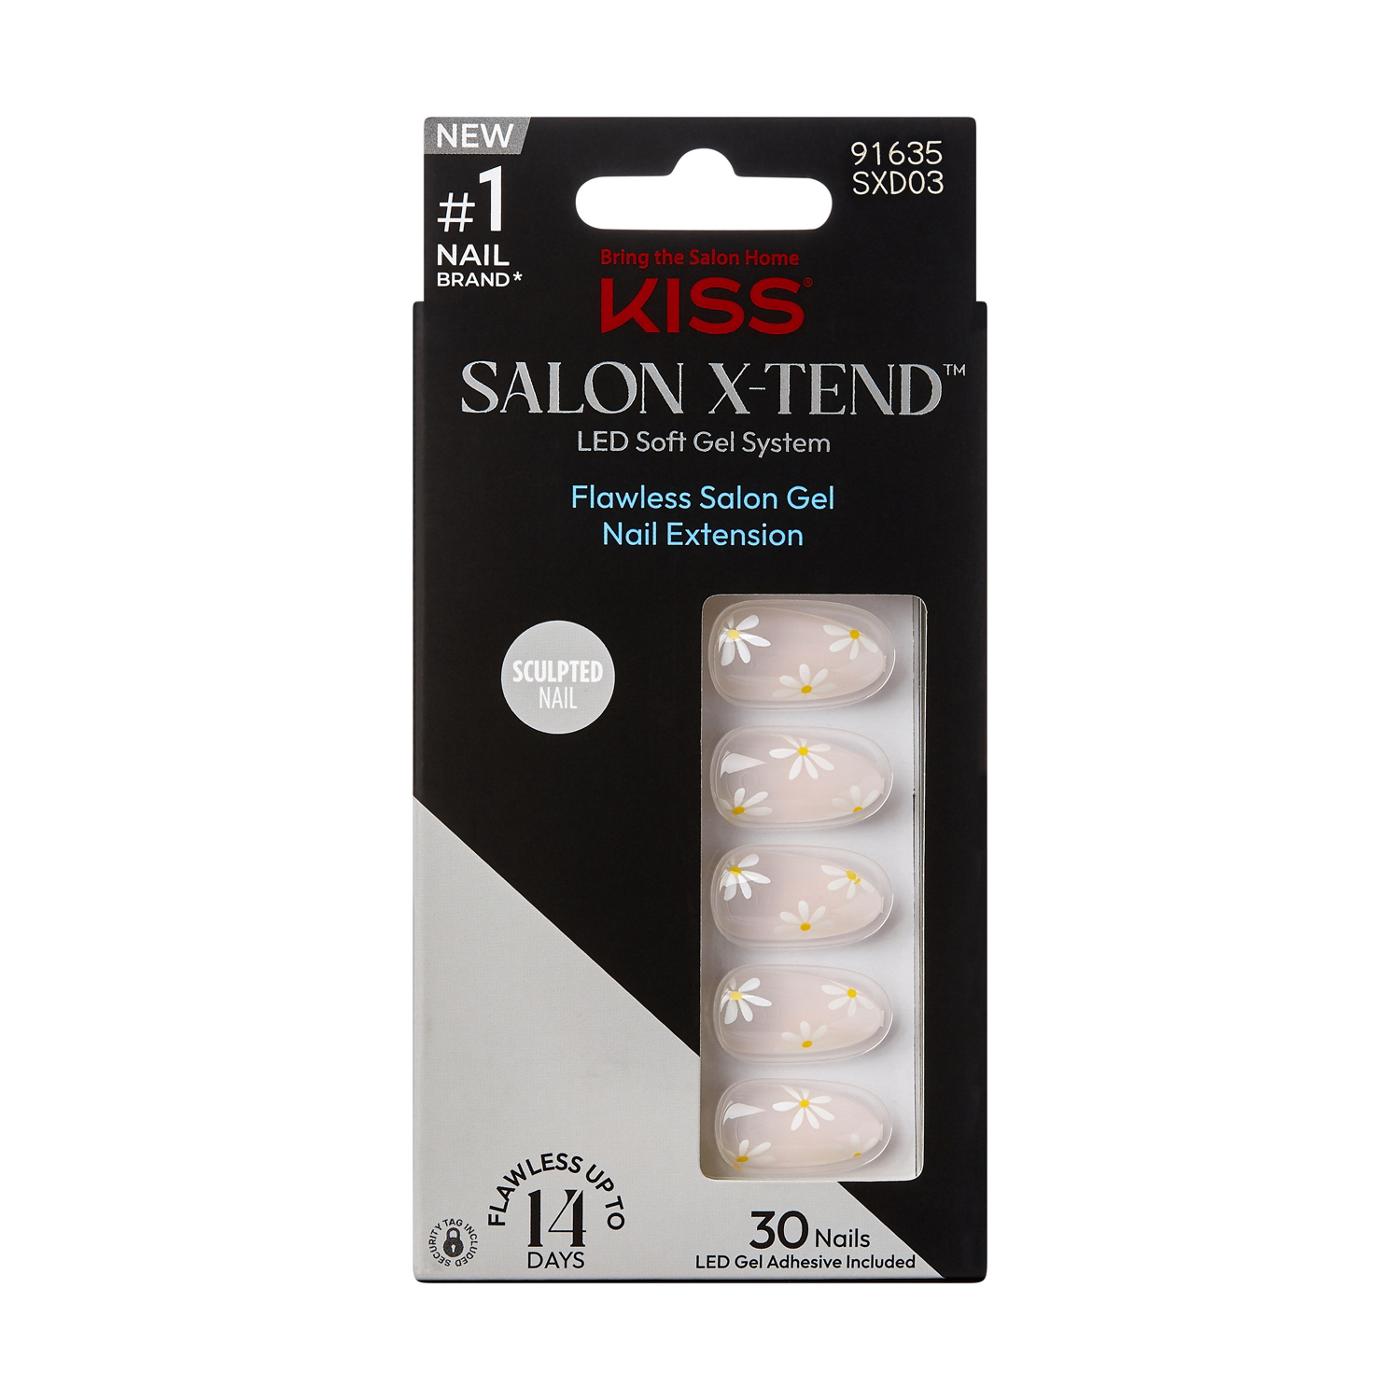 KISS Salon X-tend LED Soft Gel System - Red Flags; image 1 of 7